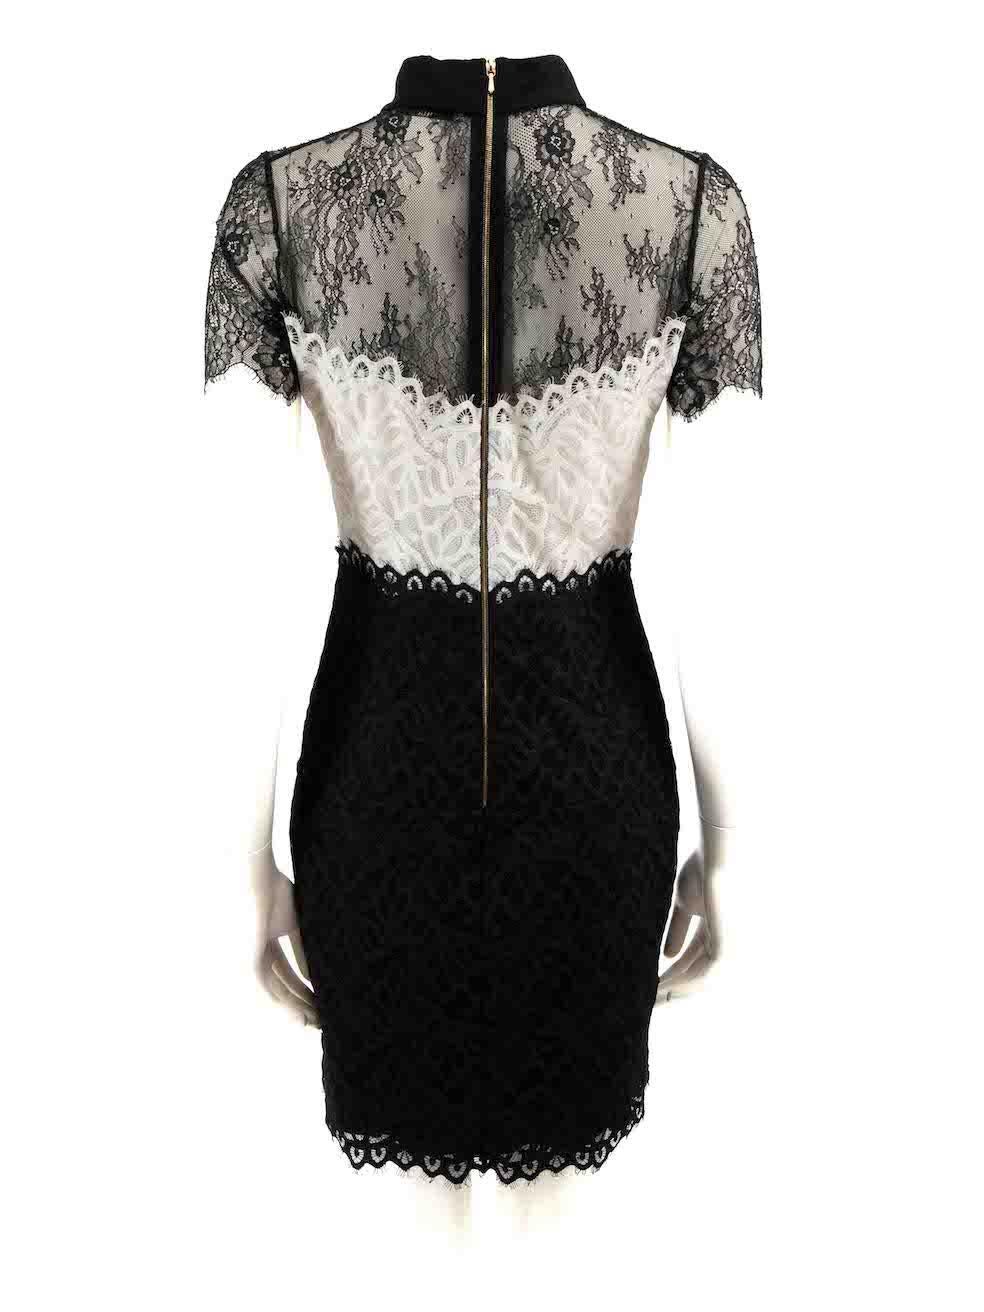 Sandro Black Lace Short Sleeve Mini Dress Size M In Good Condition For Sale In London, GB